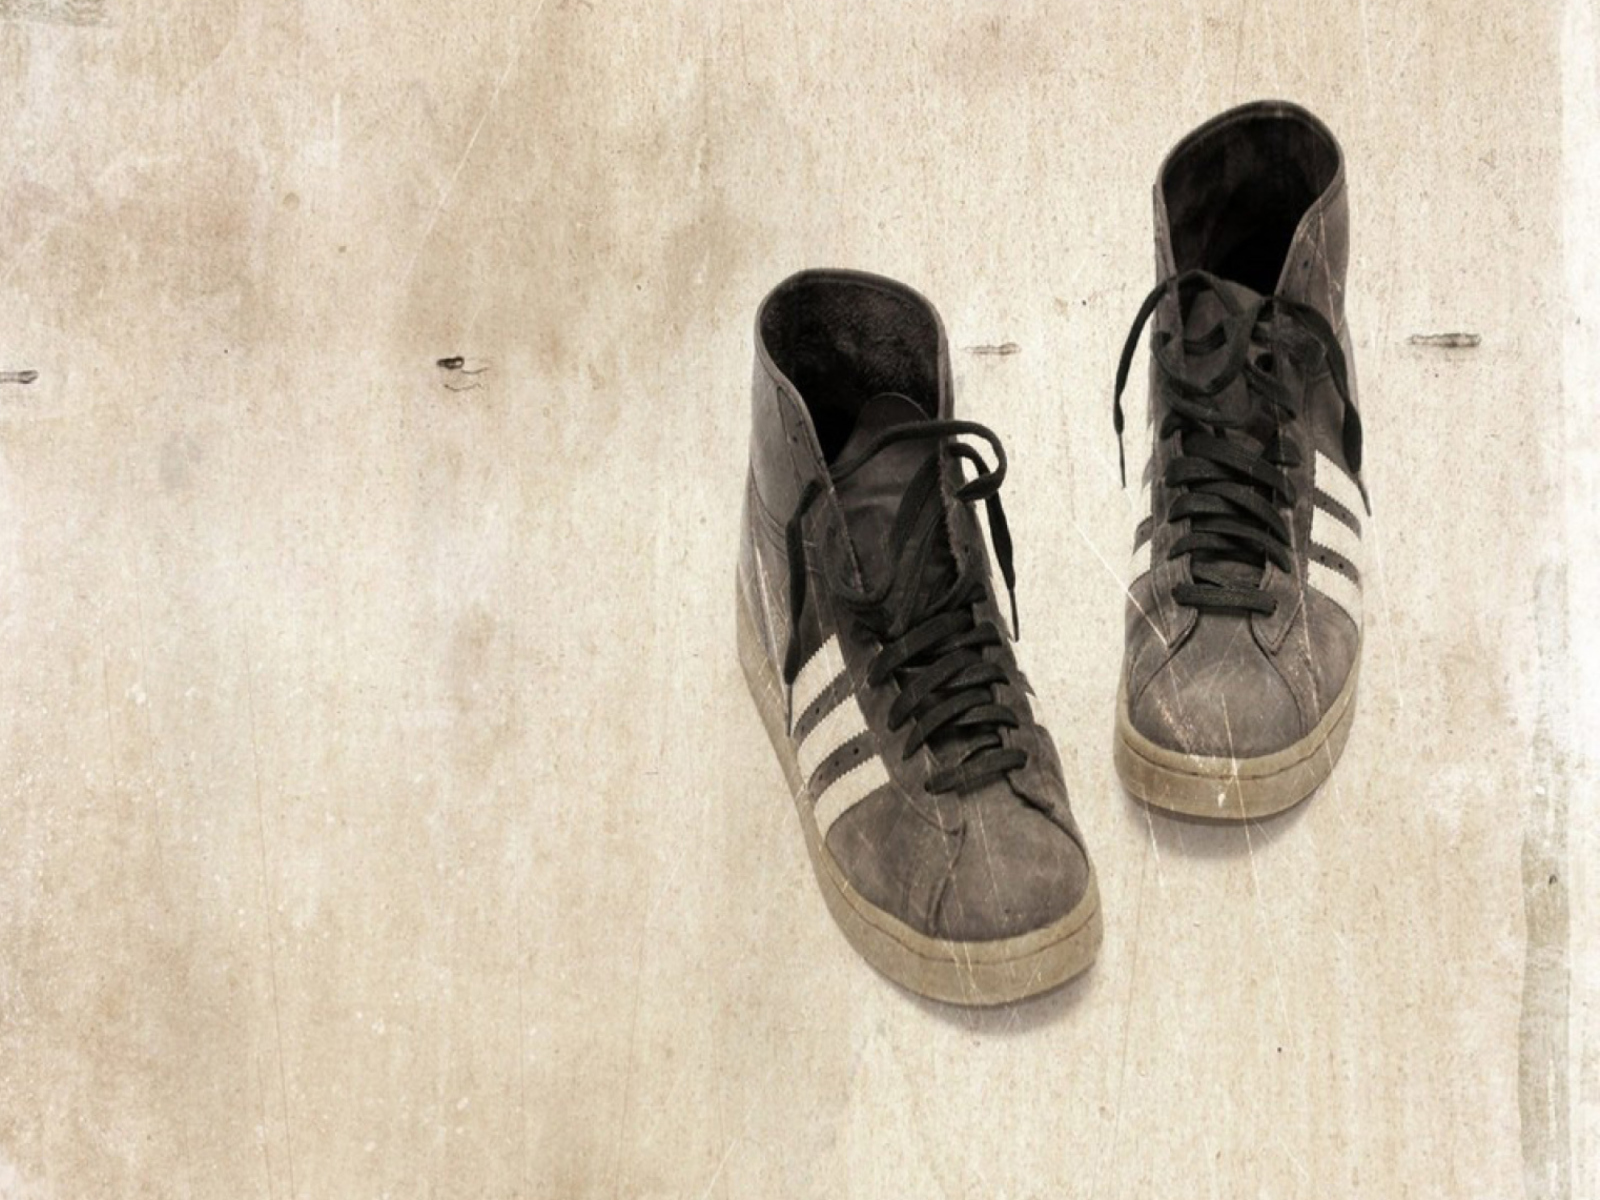 Grungy Sneakers wallpaper 1600x1200